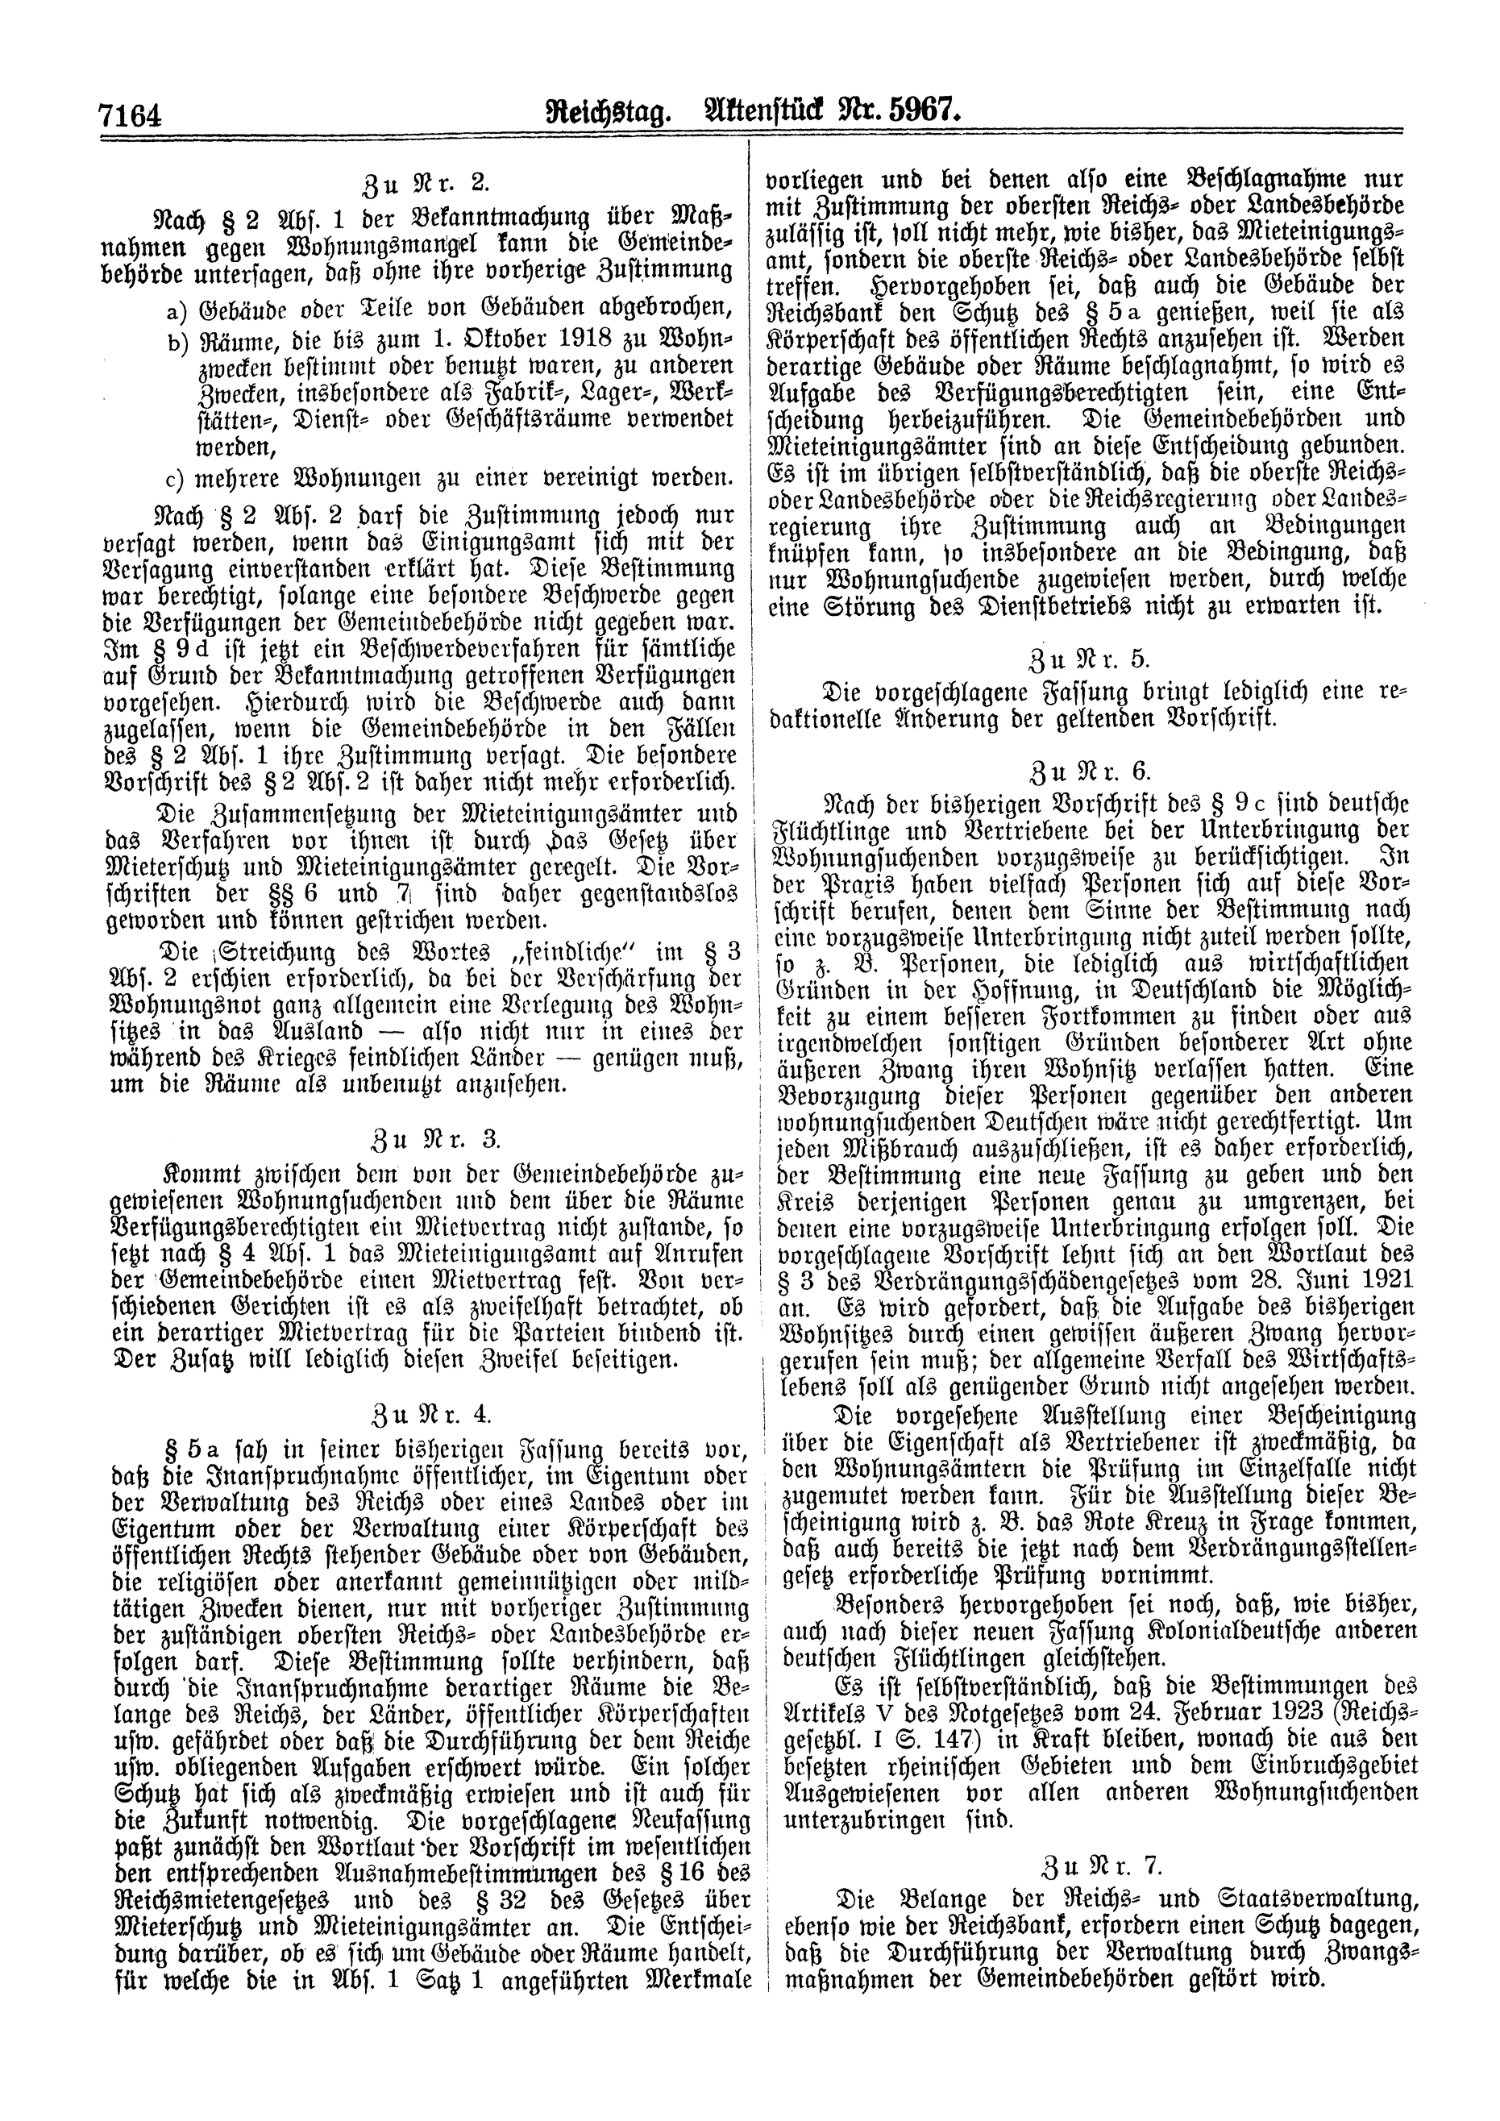 Scan of page 7164